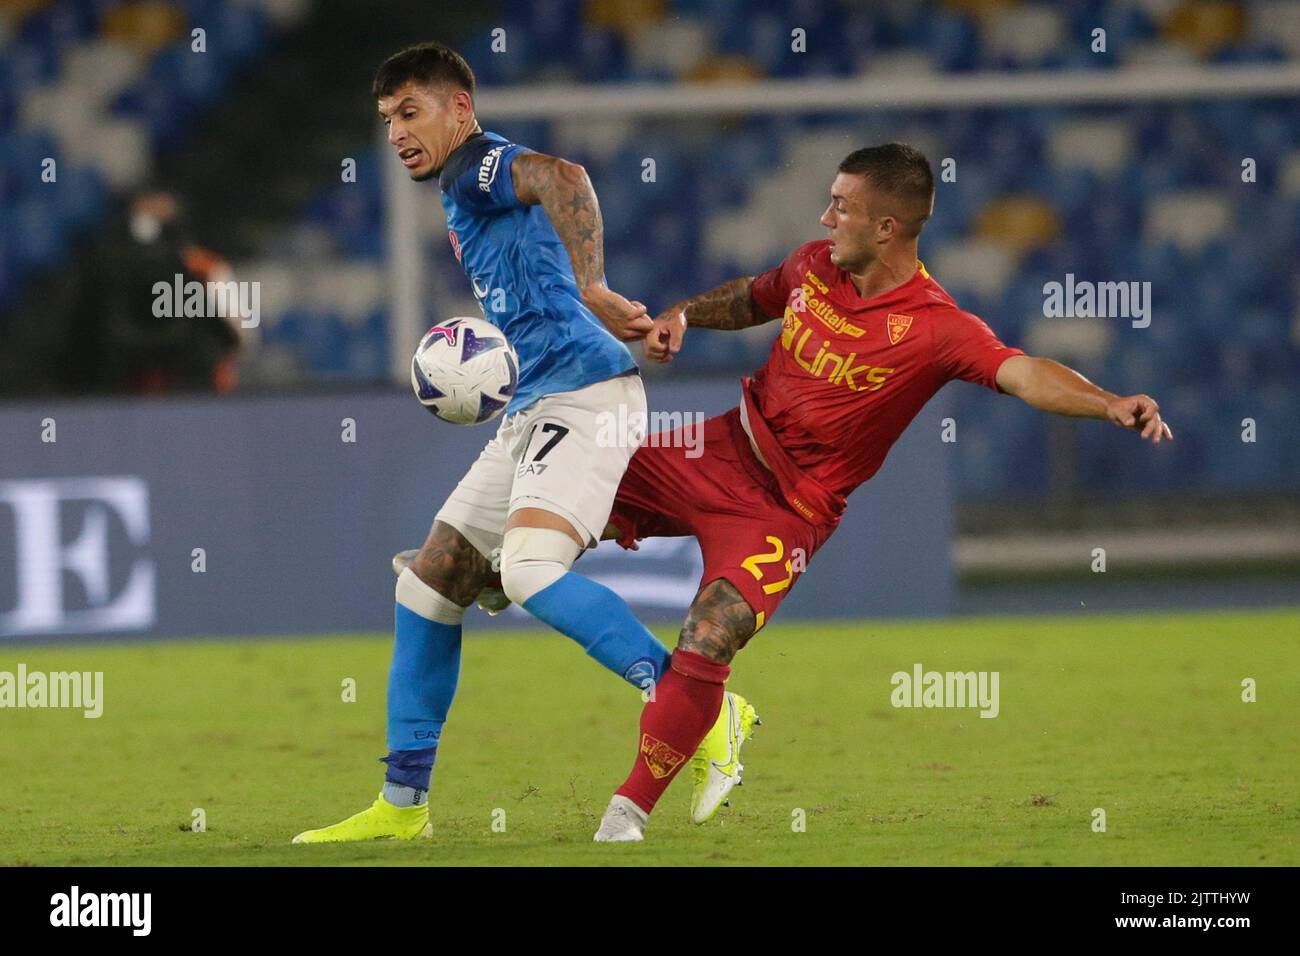 SSC Napoli's Uruguayan defender Mathias Olivera challenges for the ball with LecceÕs Brazilian forward Gabriel Strefezza  during the Serie A football match between SSC Napoli and Lecce. SSC Napoli and Lecce  draw 1-1. Stock Photo